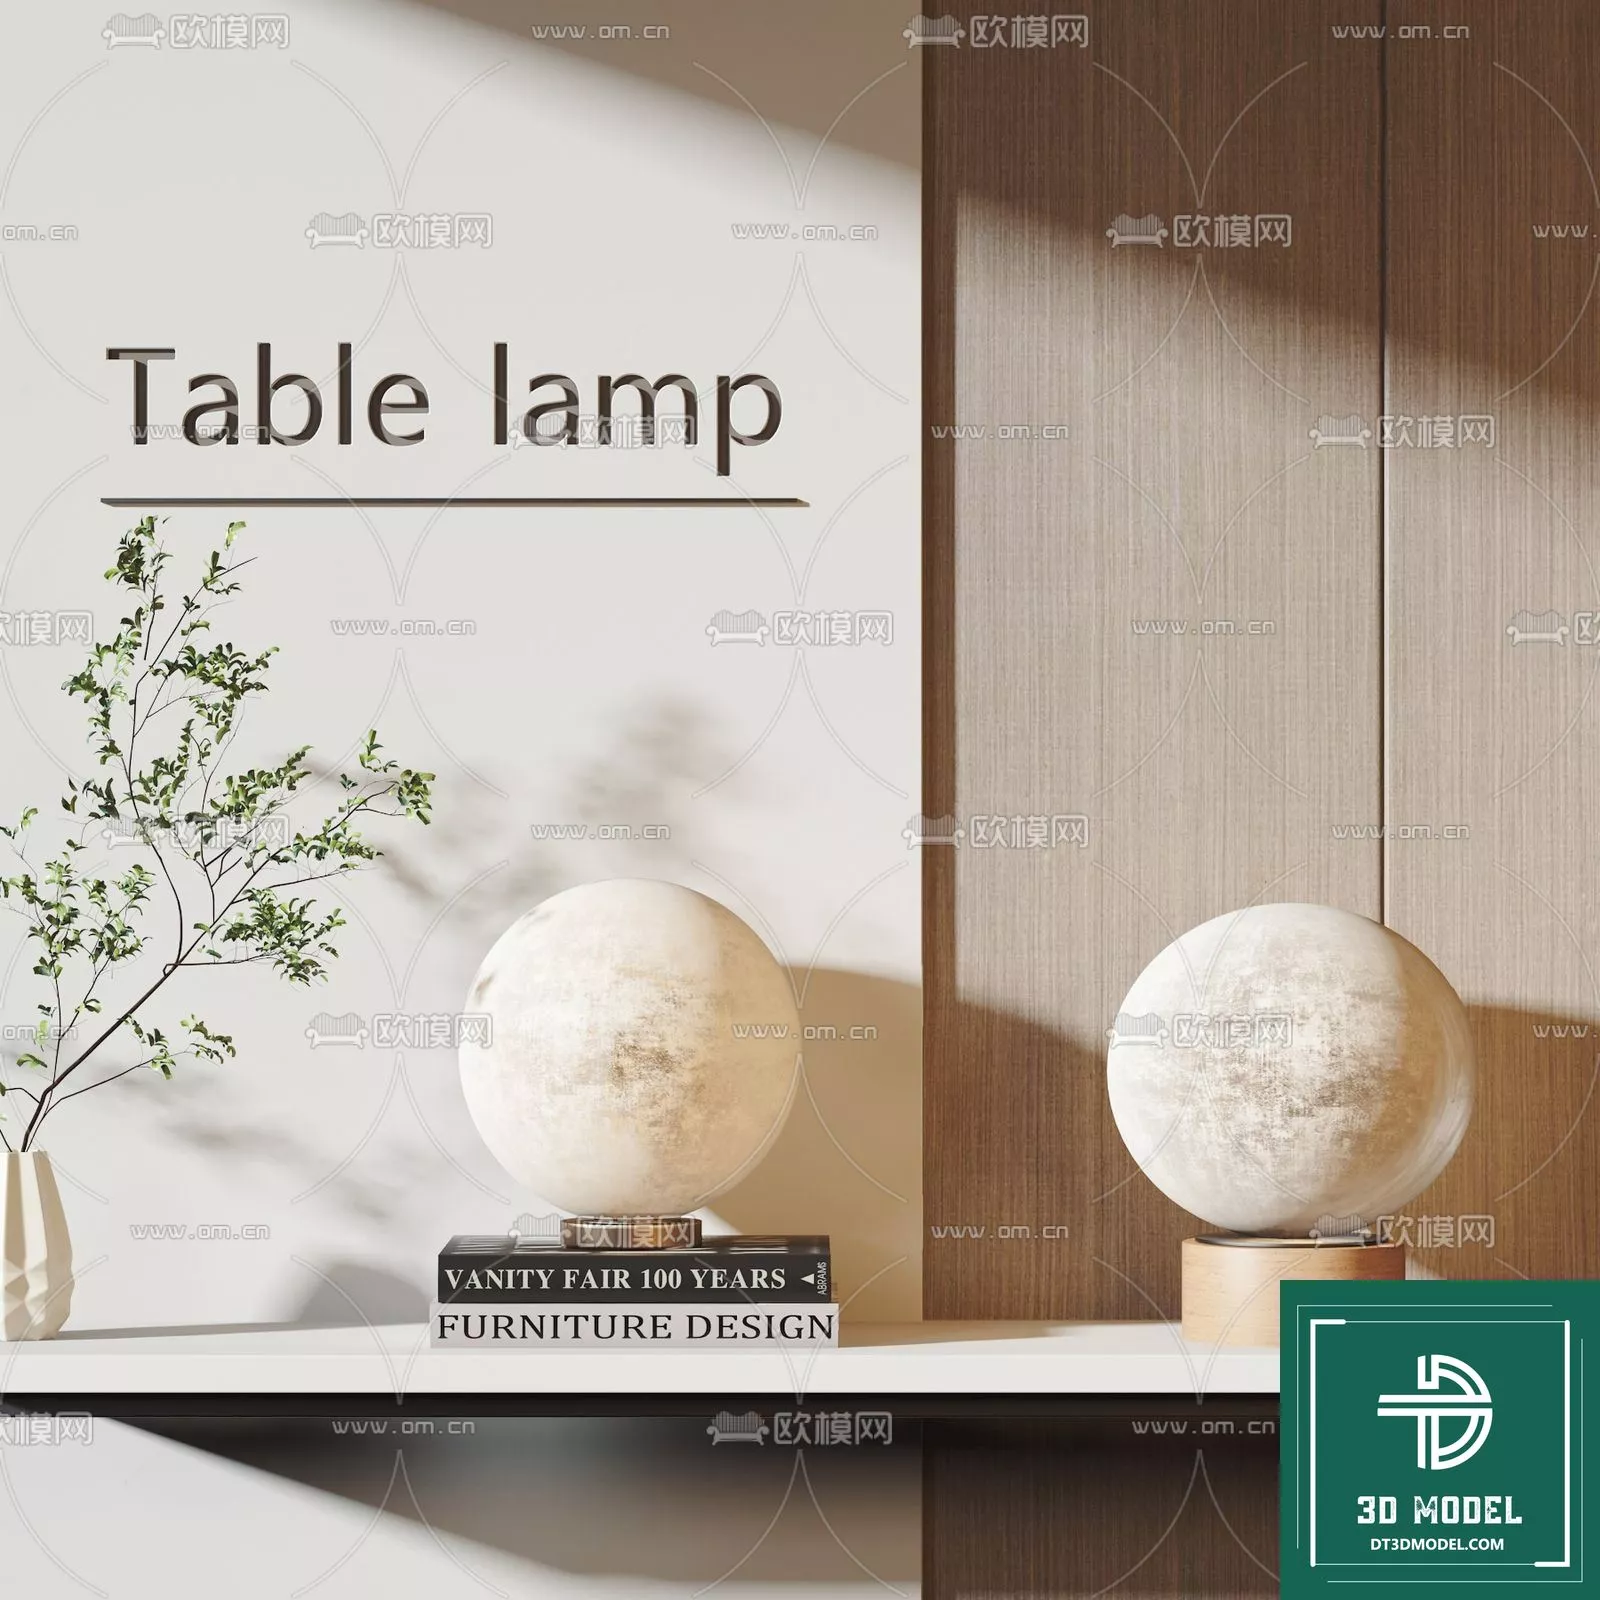 MODERN TABLE LAMP - SKETCHUP 3D MODEL - VRAY OR ENSCAPE - ID14583